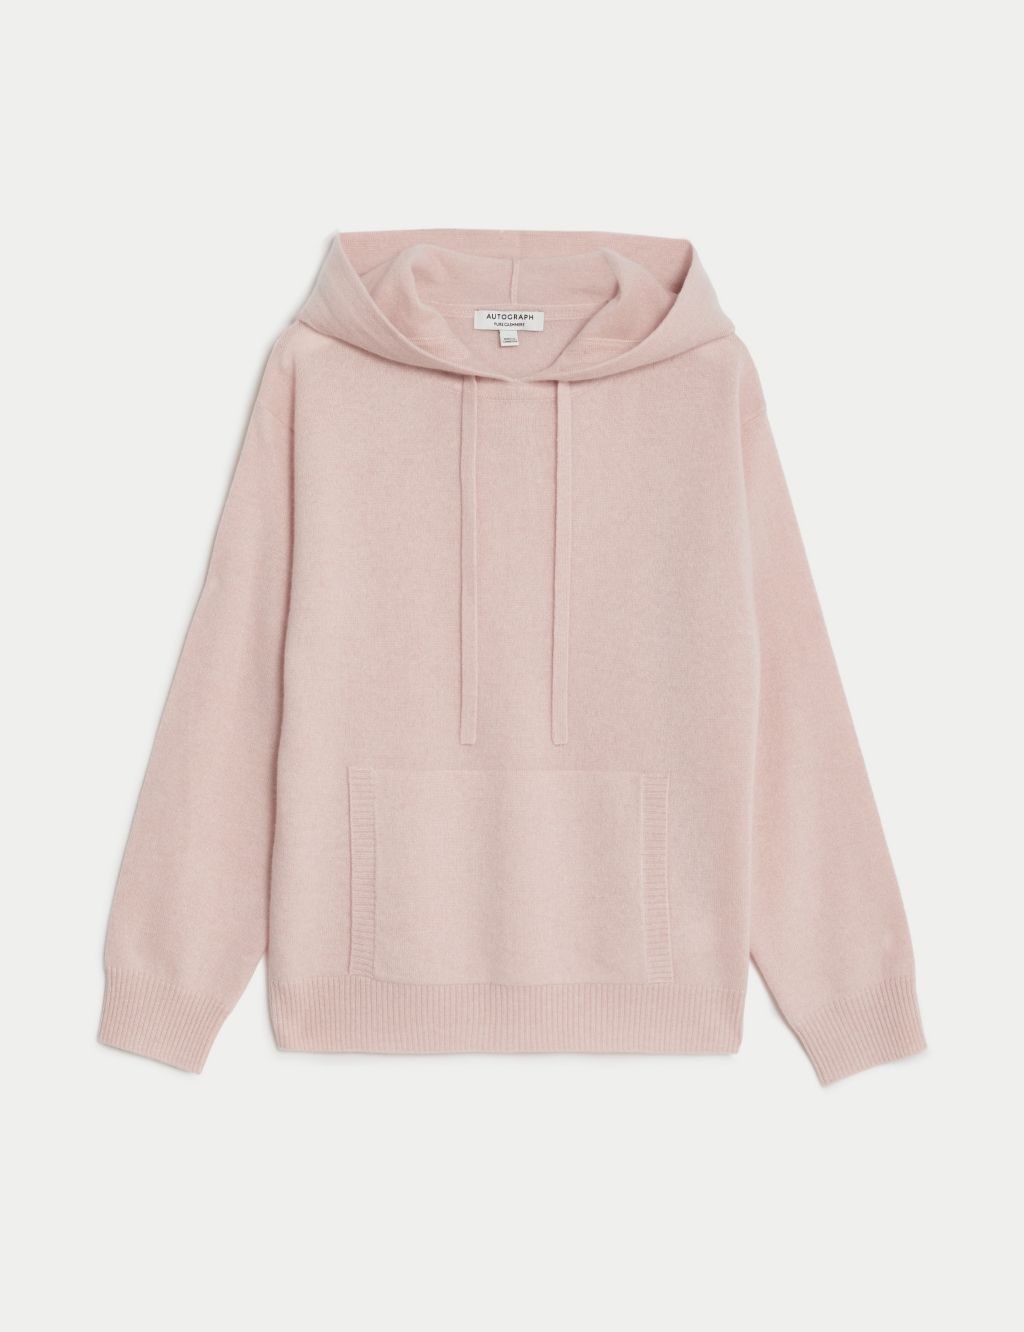 Pure Cashmere Textured Relaxed Hoodie image 2